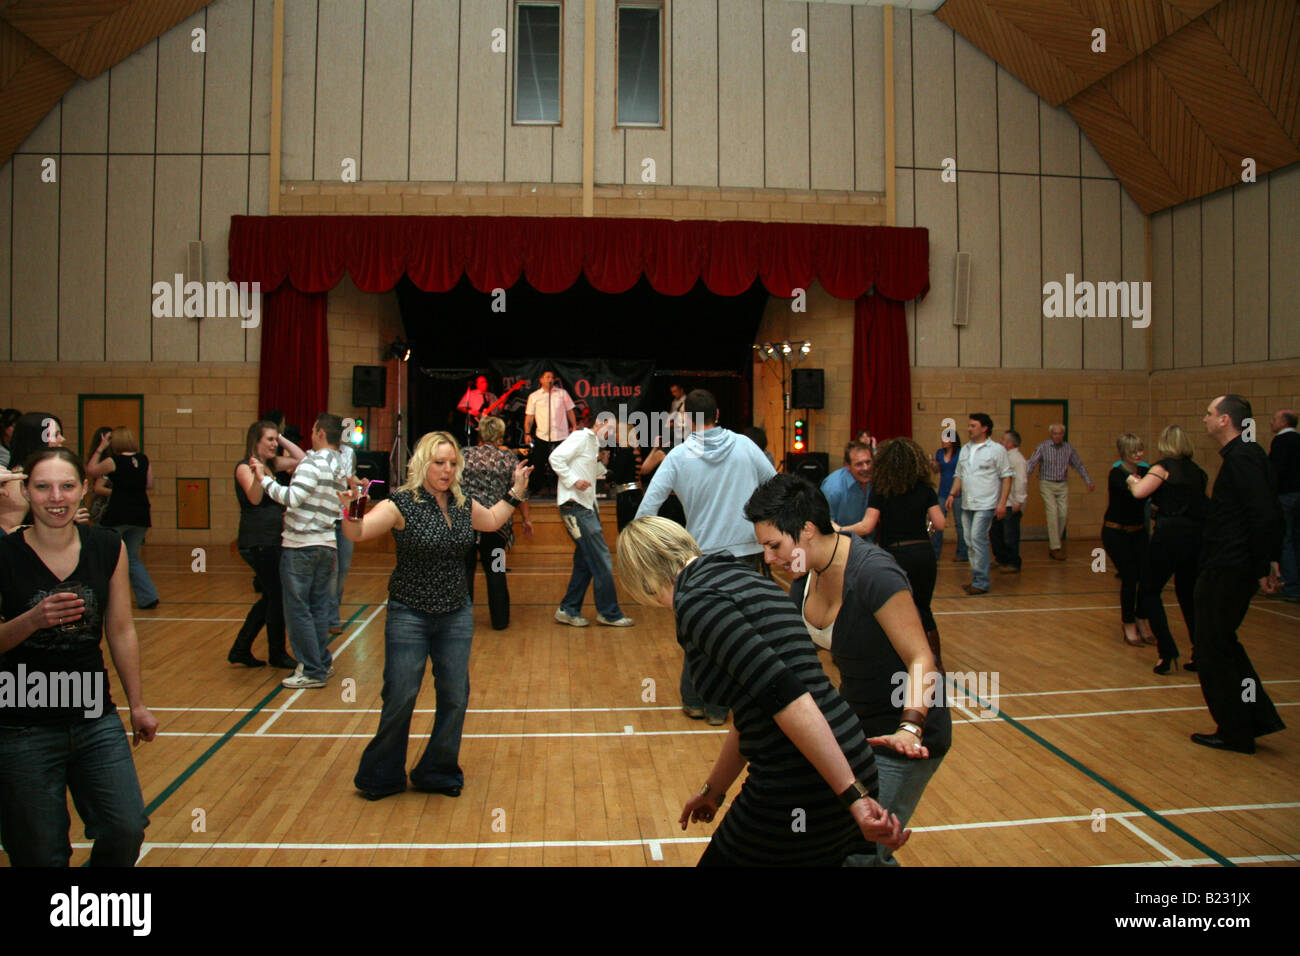 A mixed bunch of people dancing in a gymnasium to rock 'n roll band The Outlaws Stock Photo